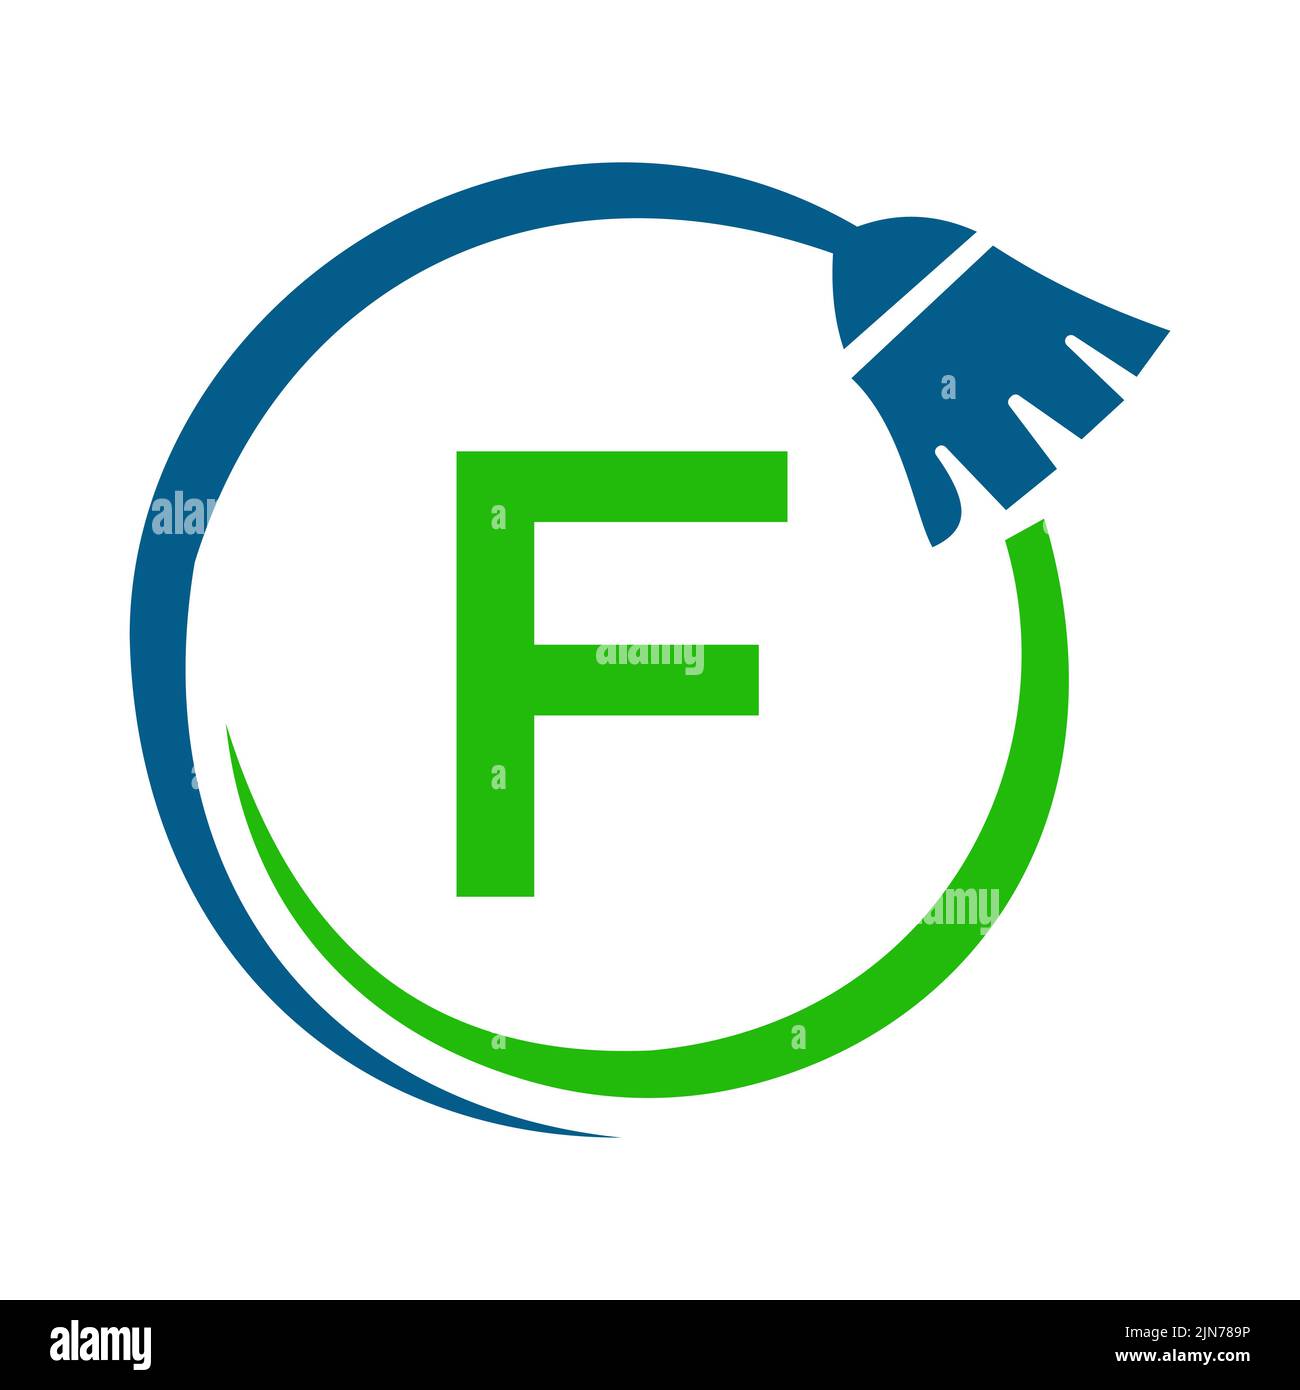 Maid House Cleaning Logo On Letter F Concept. Maid Logo, Cleaning Brush ...